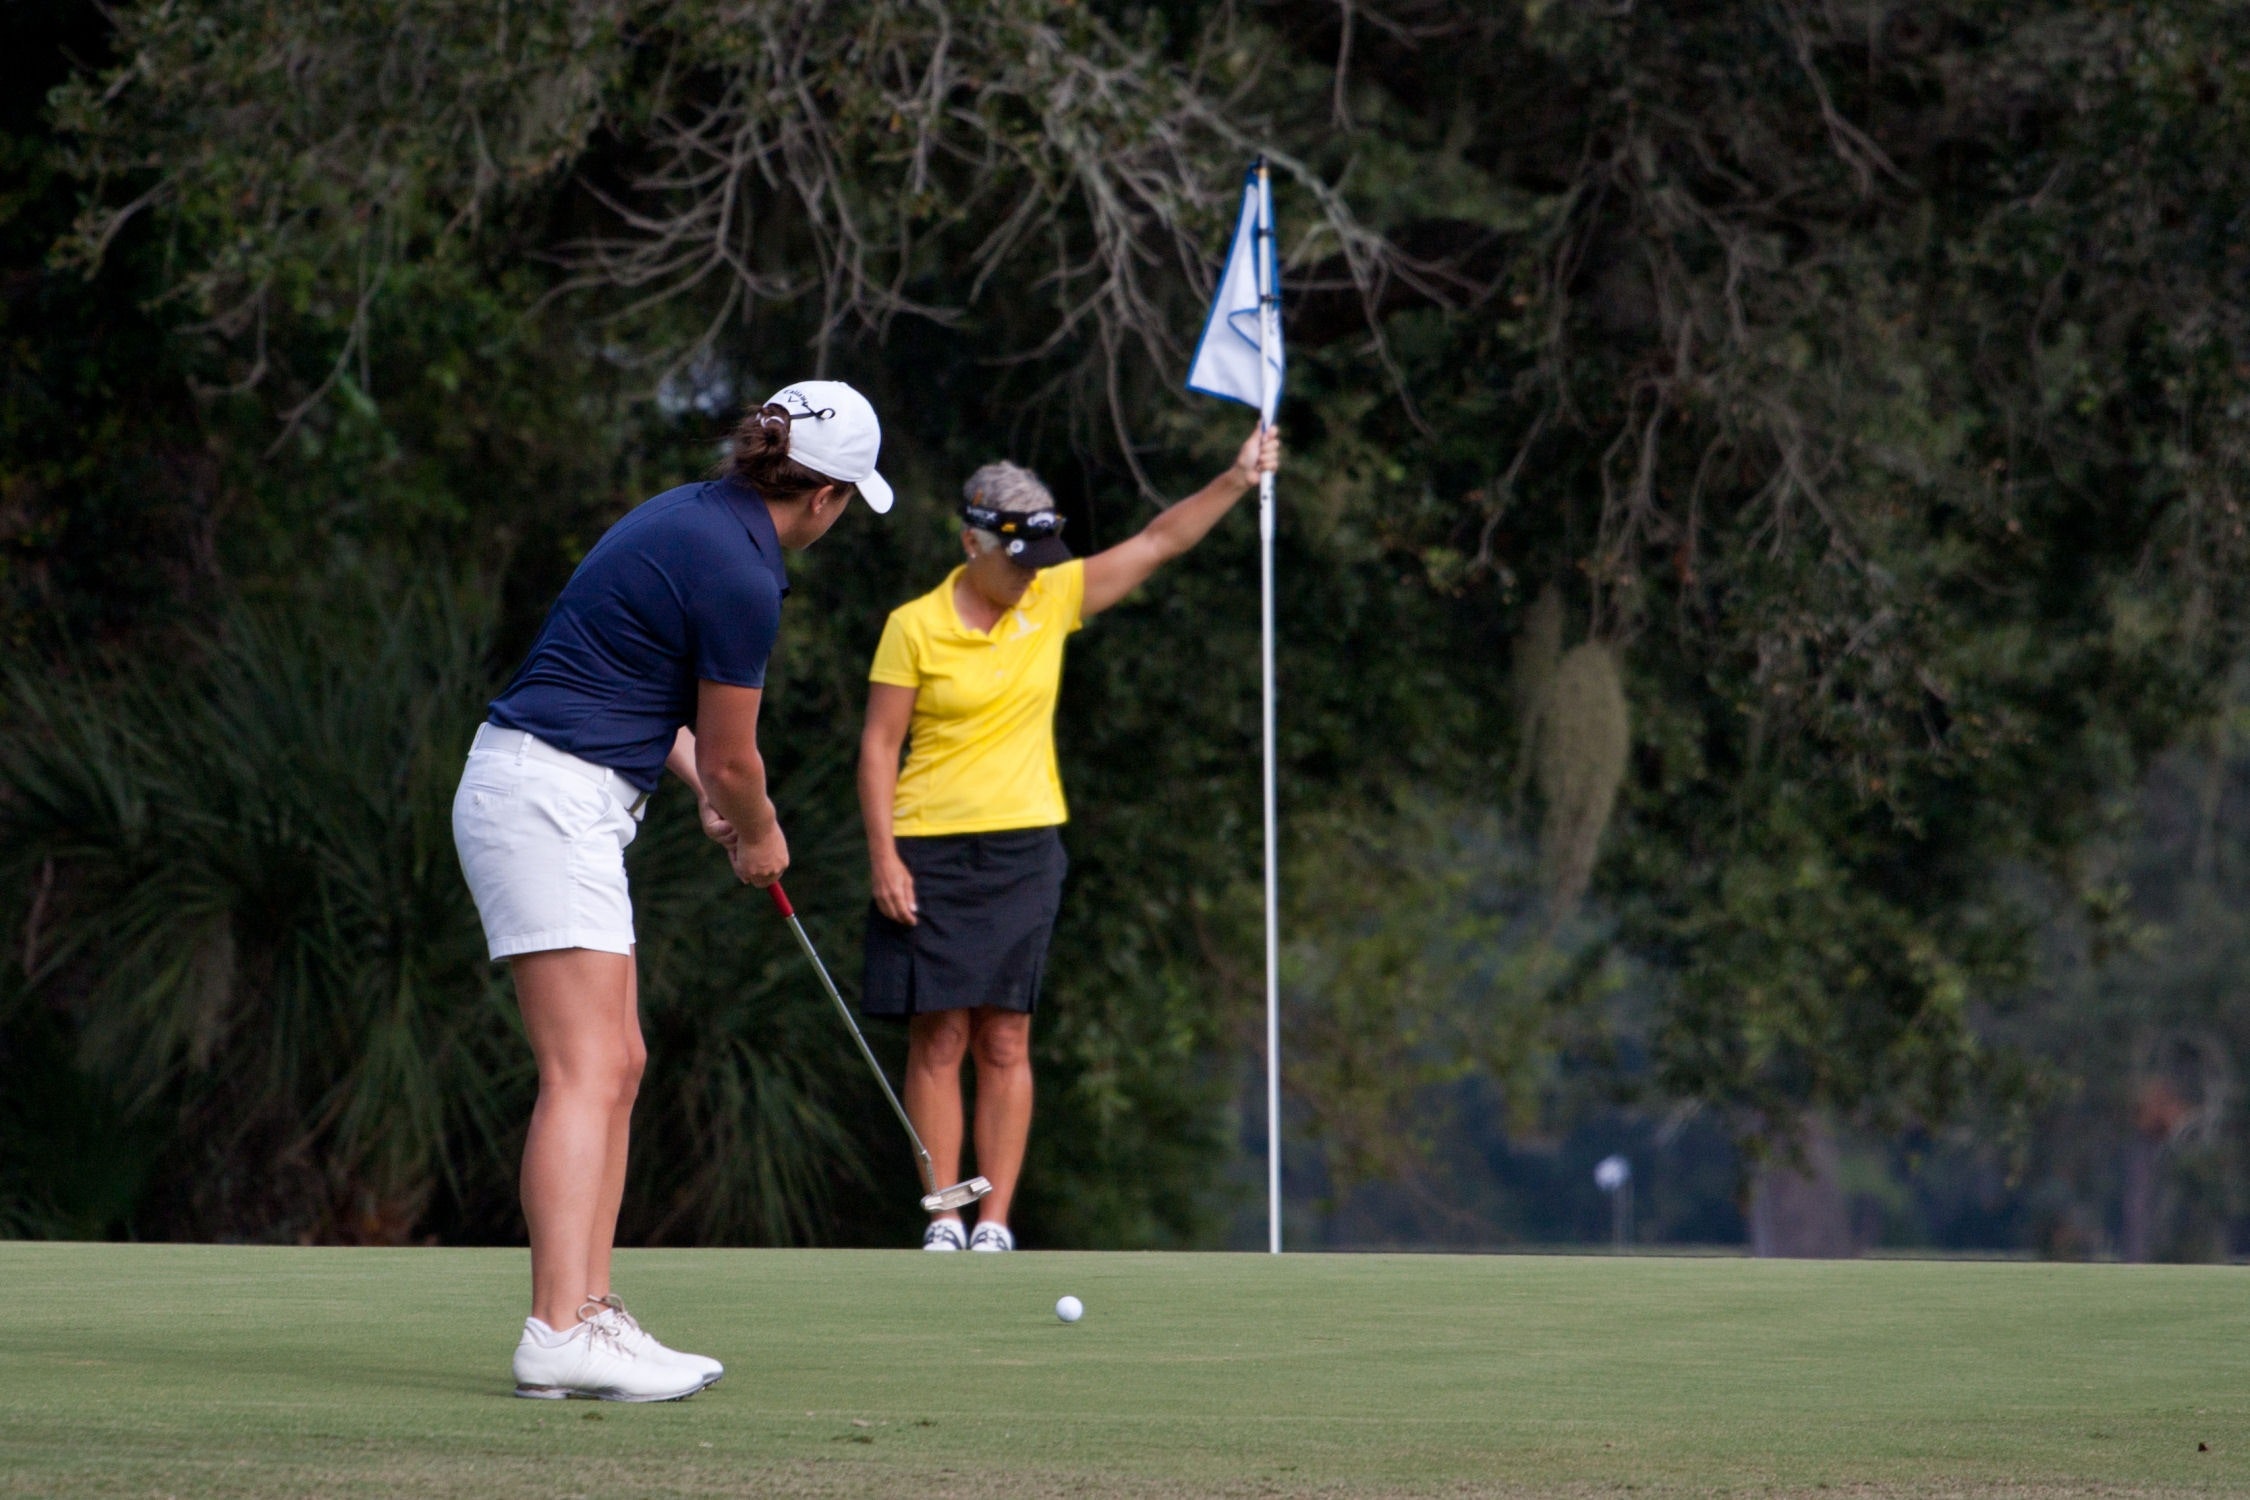 Woman putting and another woman holding up the pin